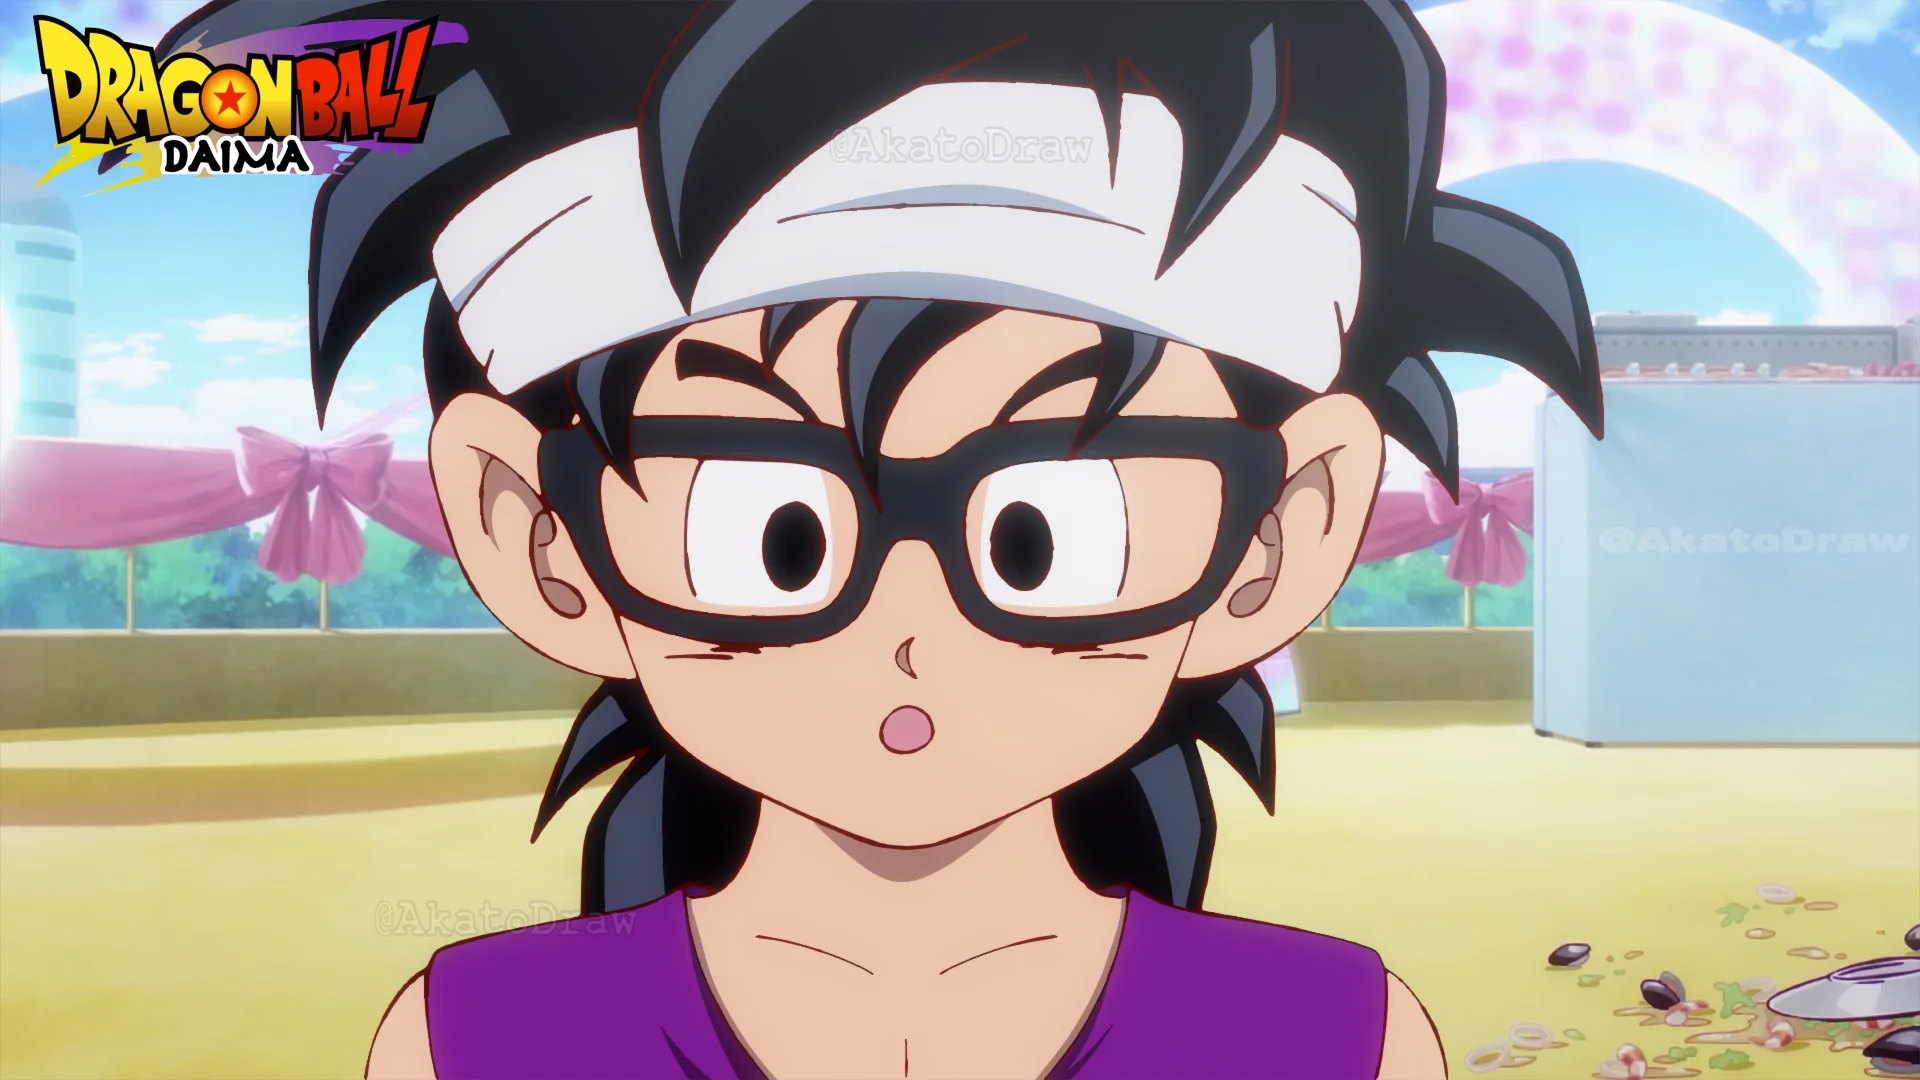 Exciting First Look Dragon Ball Daima Brings Back Kid Goku with Fresh Twists in 2024